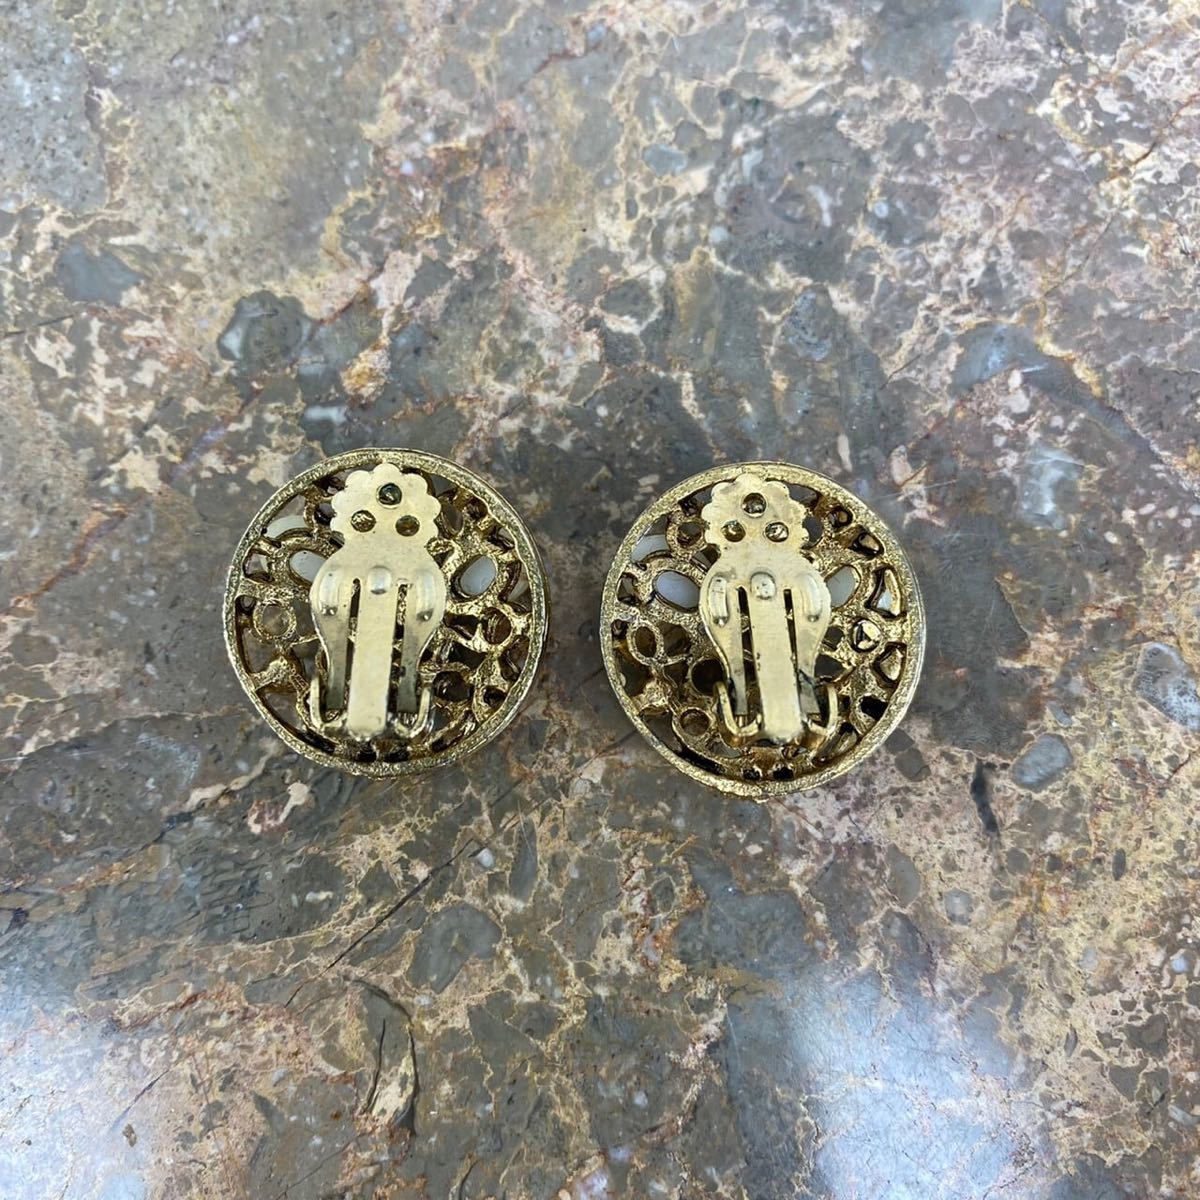 USA VINTAGE PEARL DESIGN EAR CLIPS/アメリカンヴィンテージパールデザインイヤリング